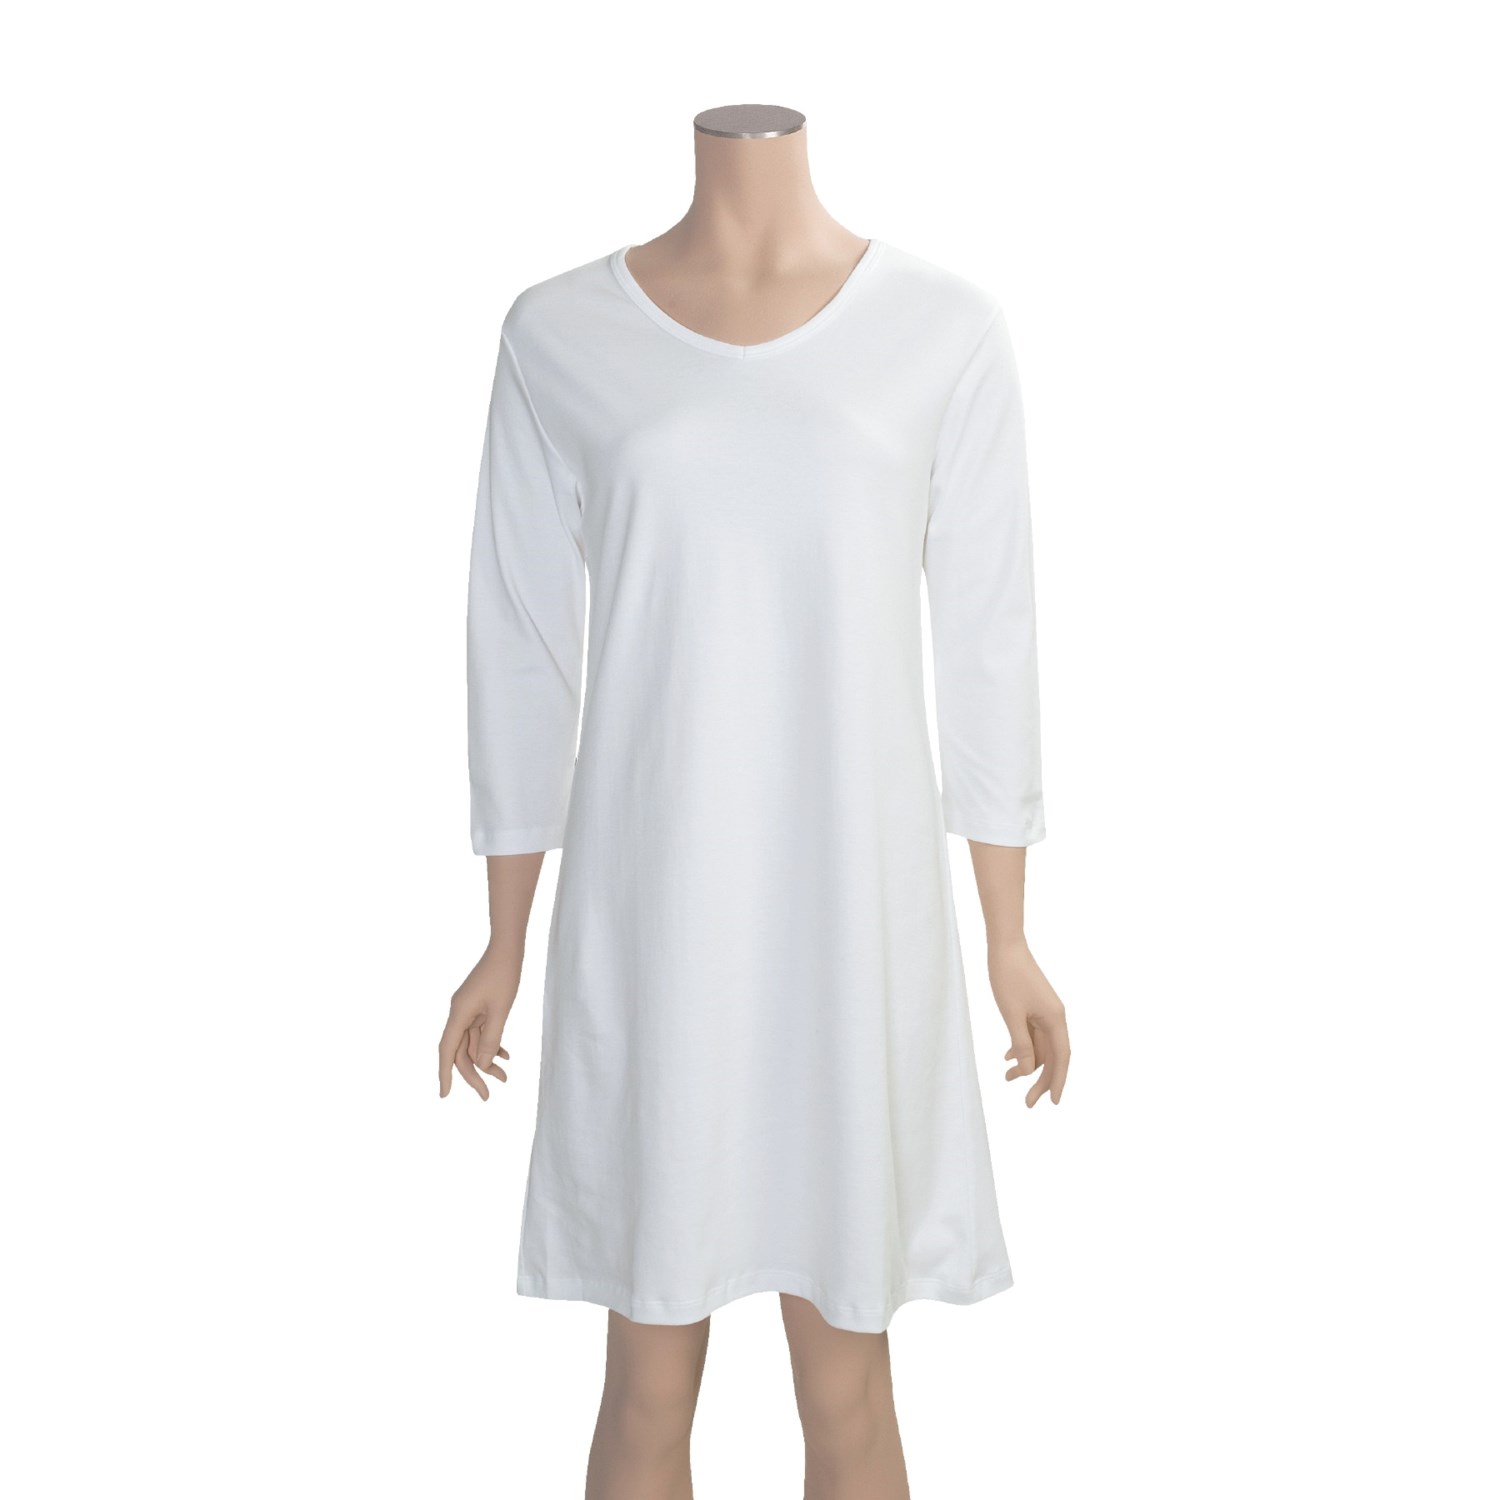 Cotn Pima Cotton Nightgown (For Women) - Save 43%